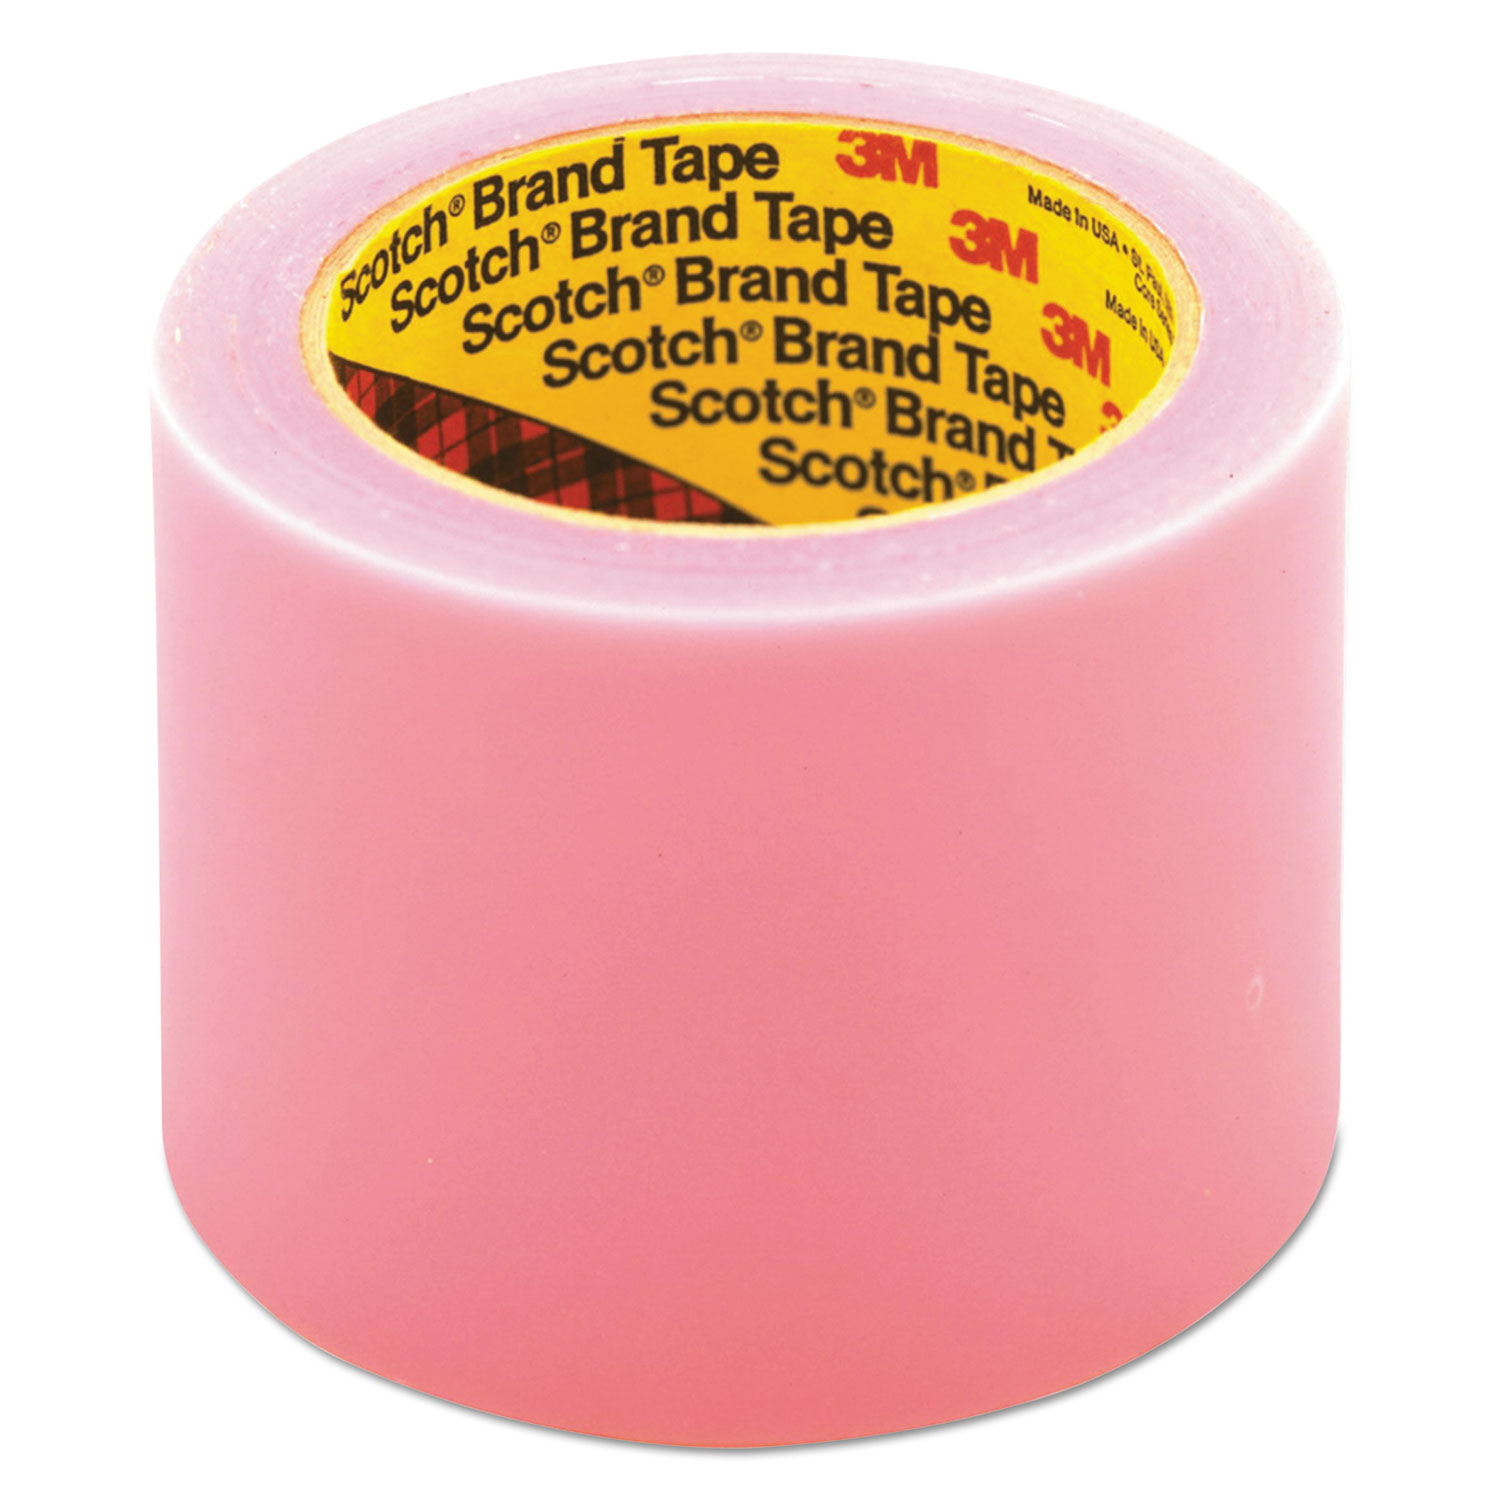 Label Protection Tape, 2.5 Mil Pink Tint Film Tape, 4 x 72yds, 3 Core